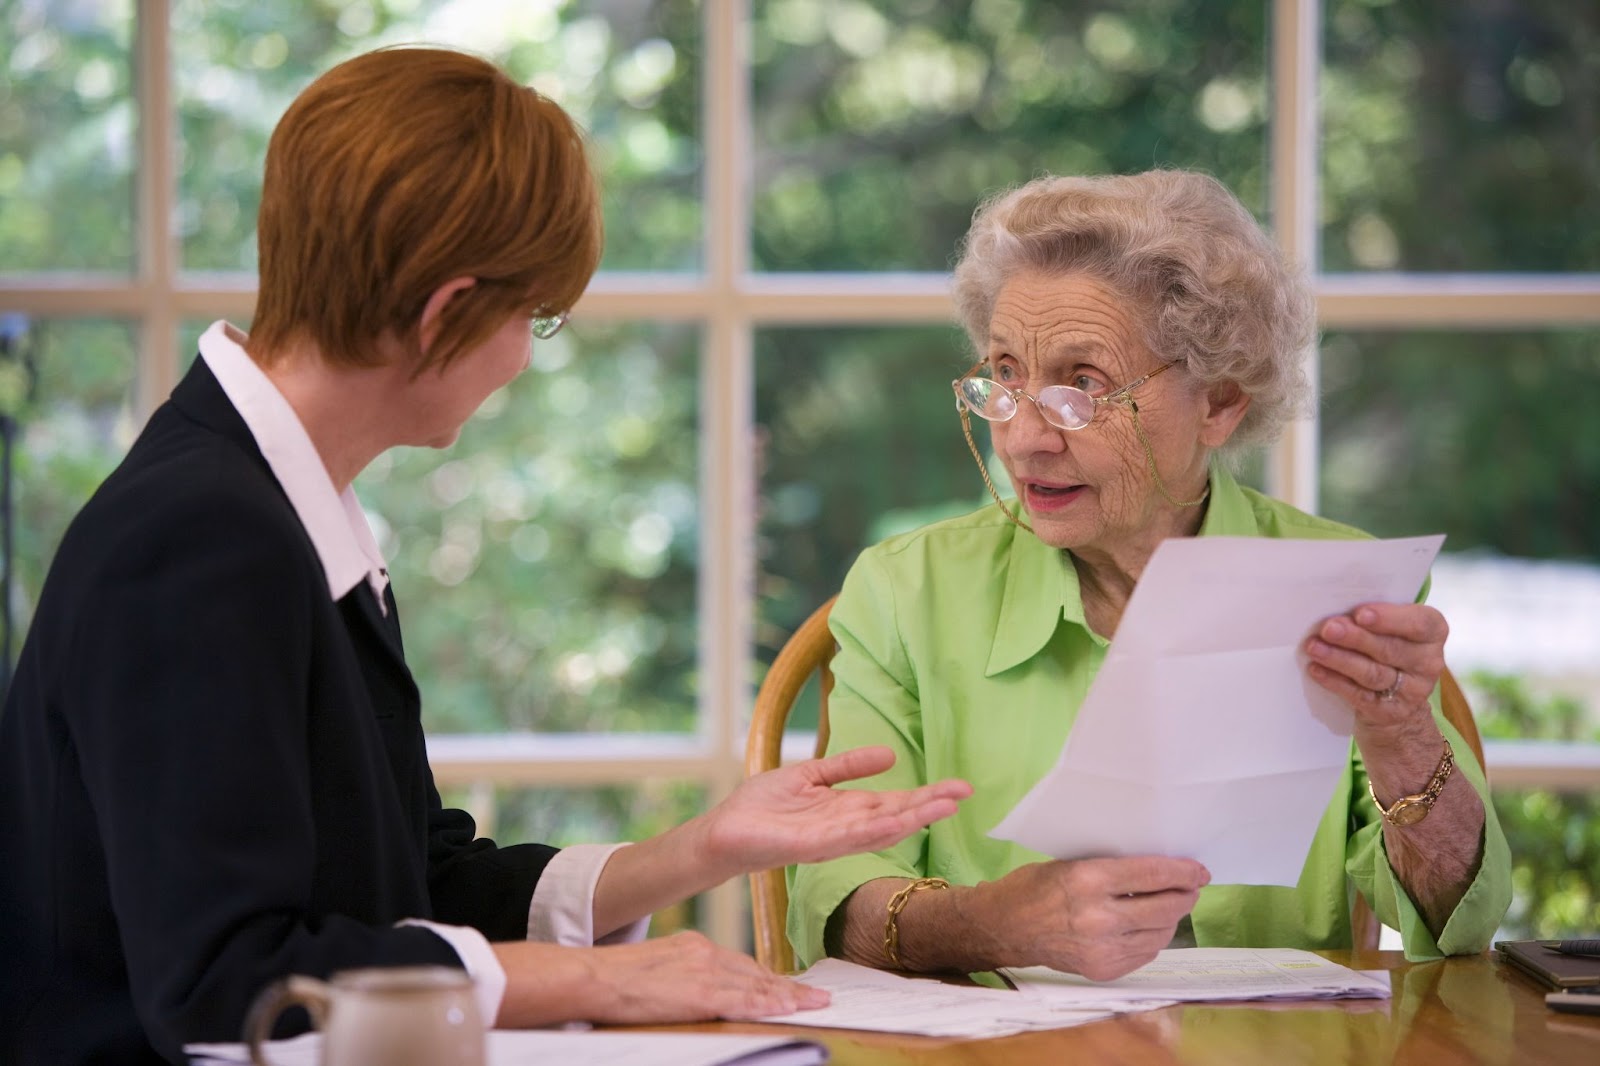 Senior consulting with financial advisor about assisted living costs